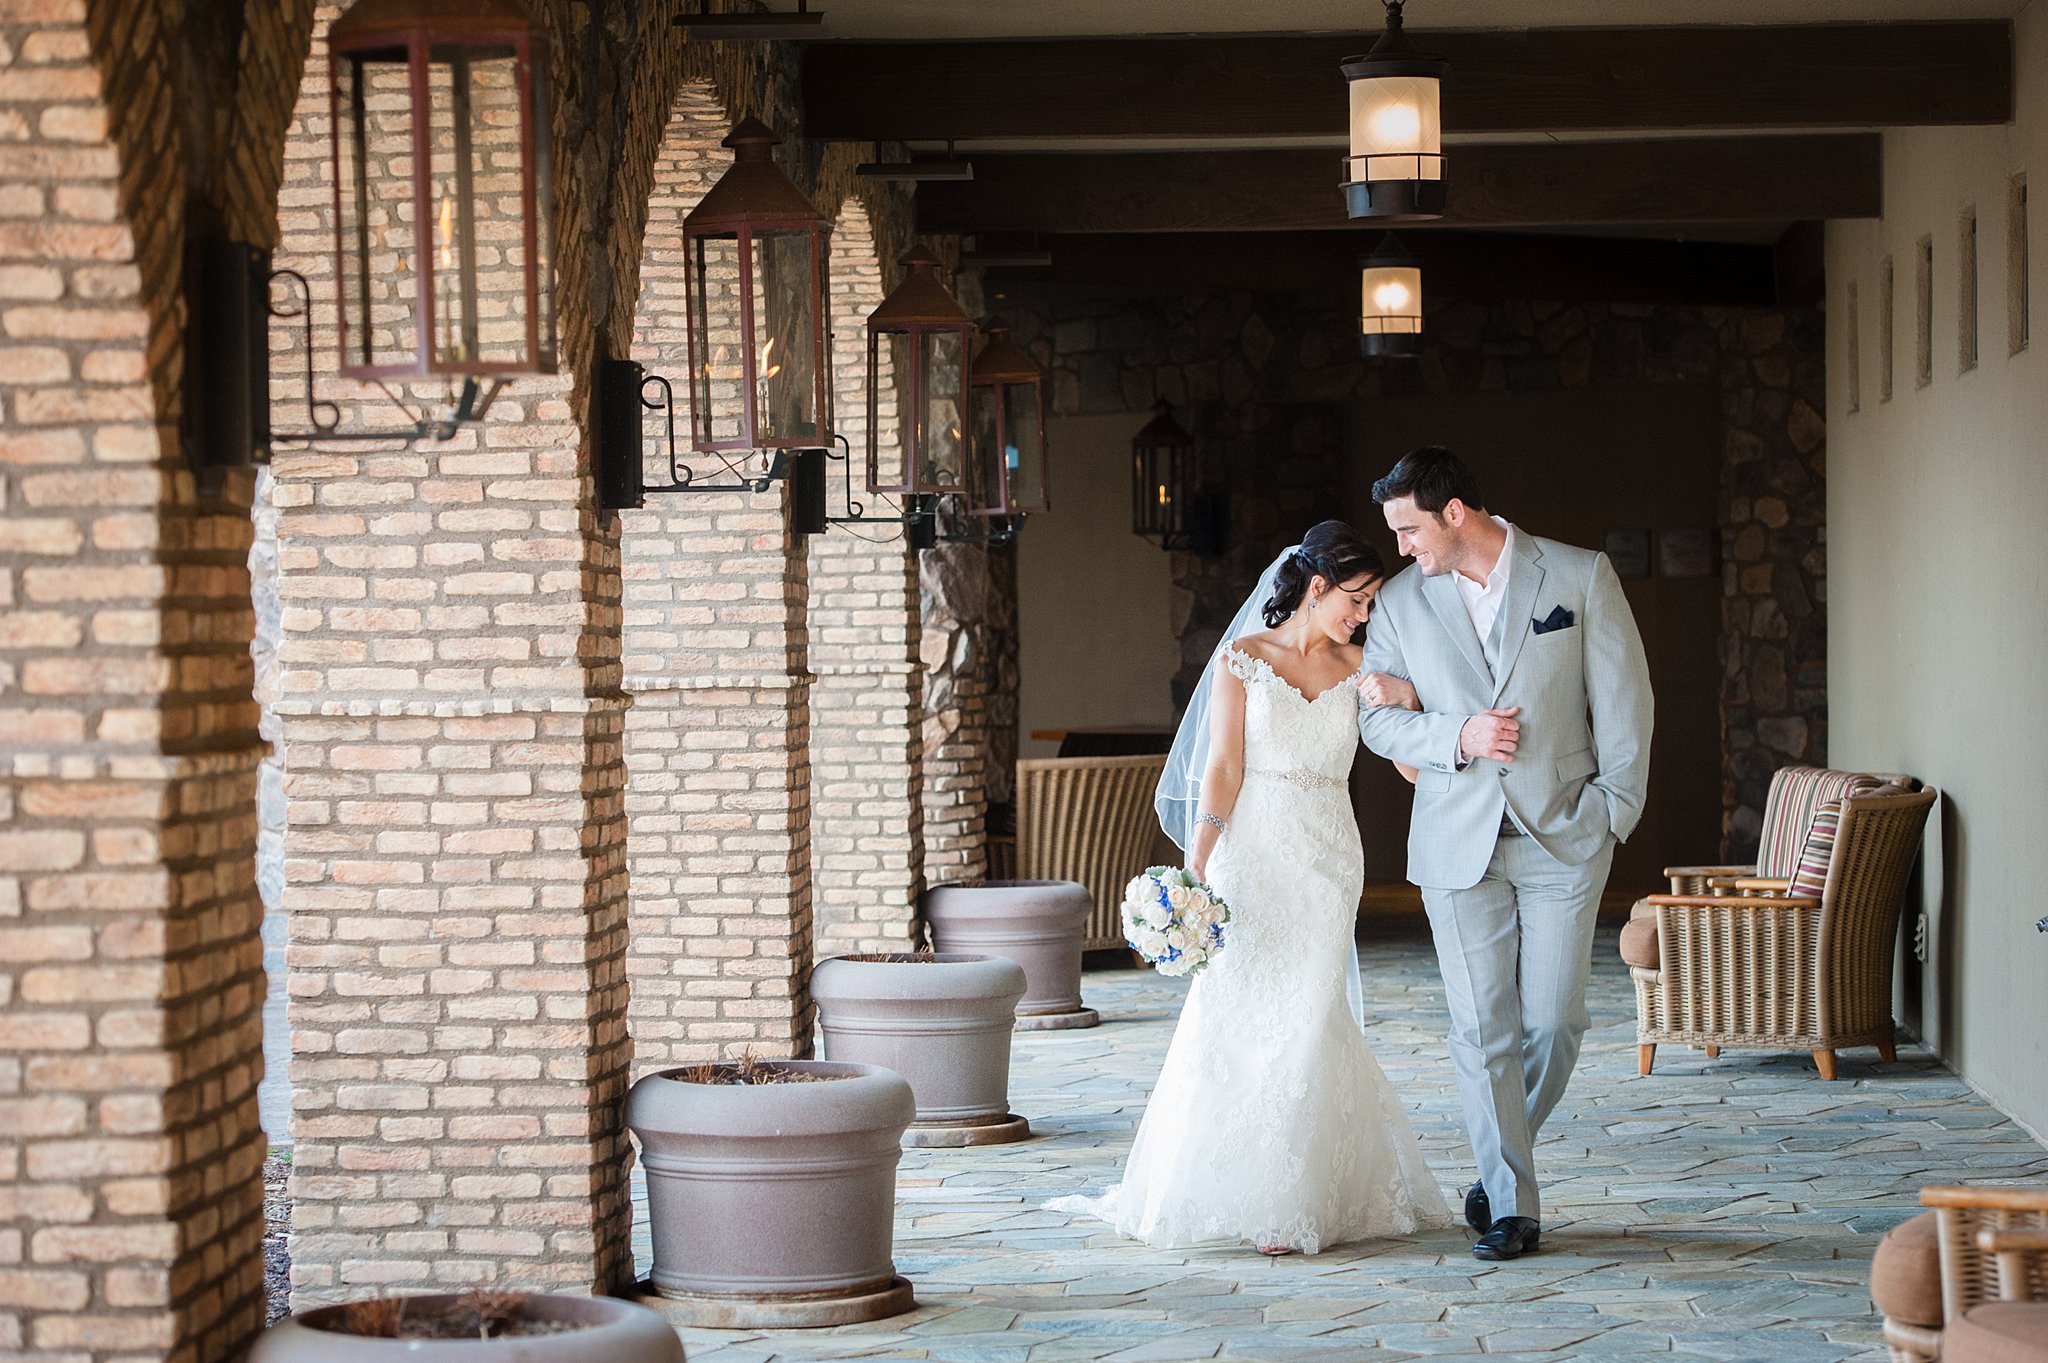 Newlyweds walk through a brick and stone porch arm in arm at one of the Colorado Springs Wedding Venues